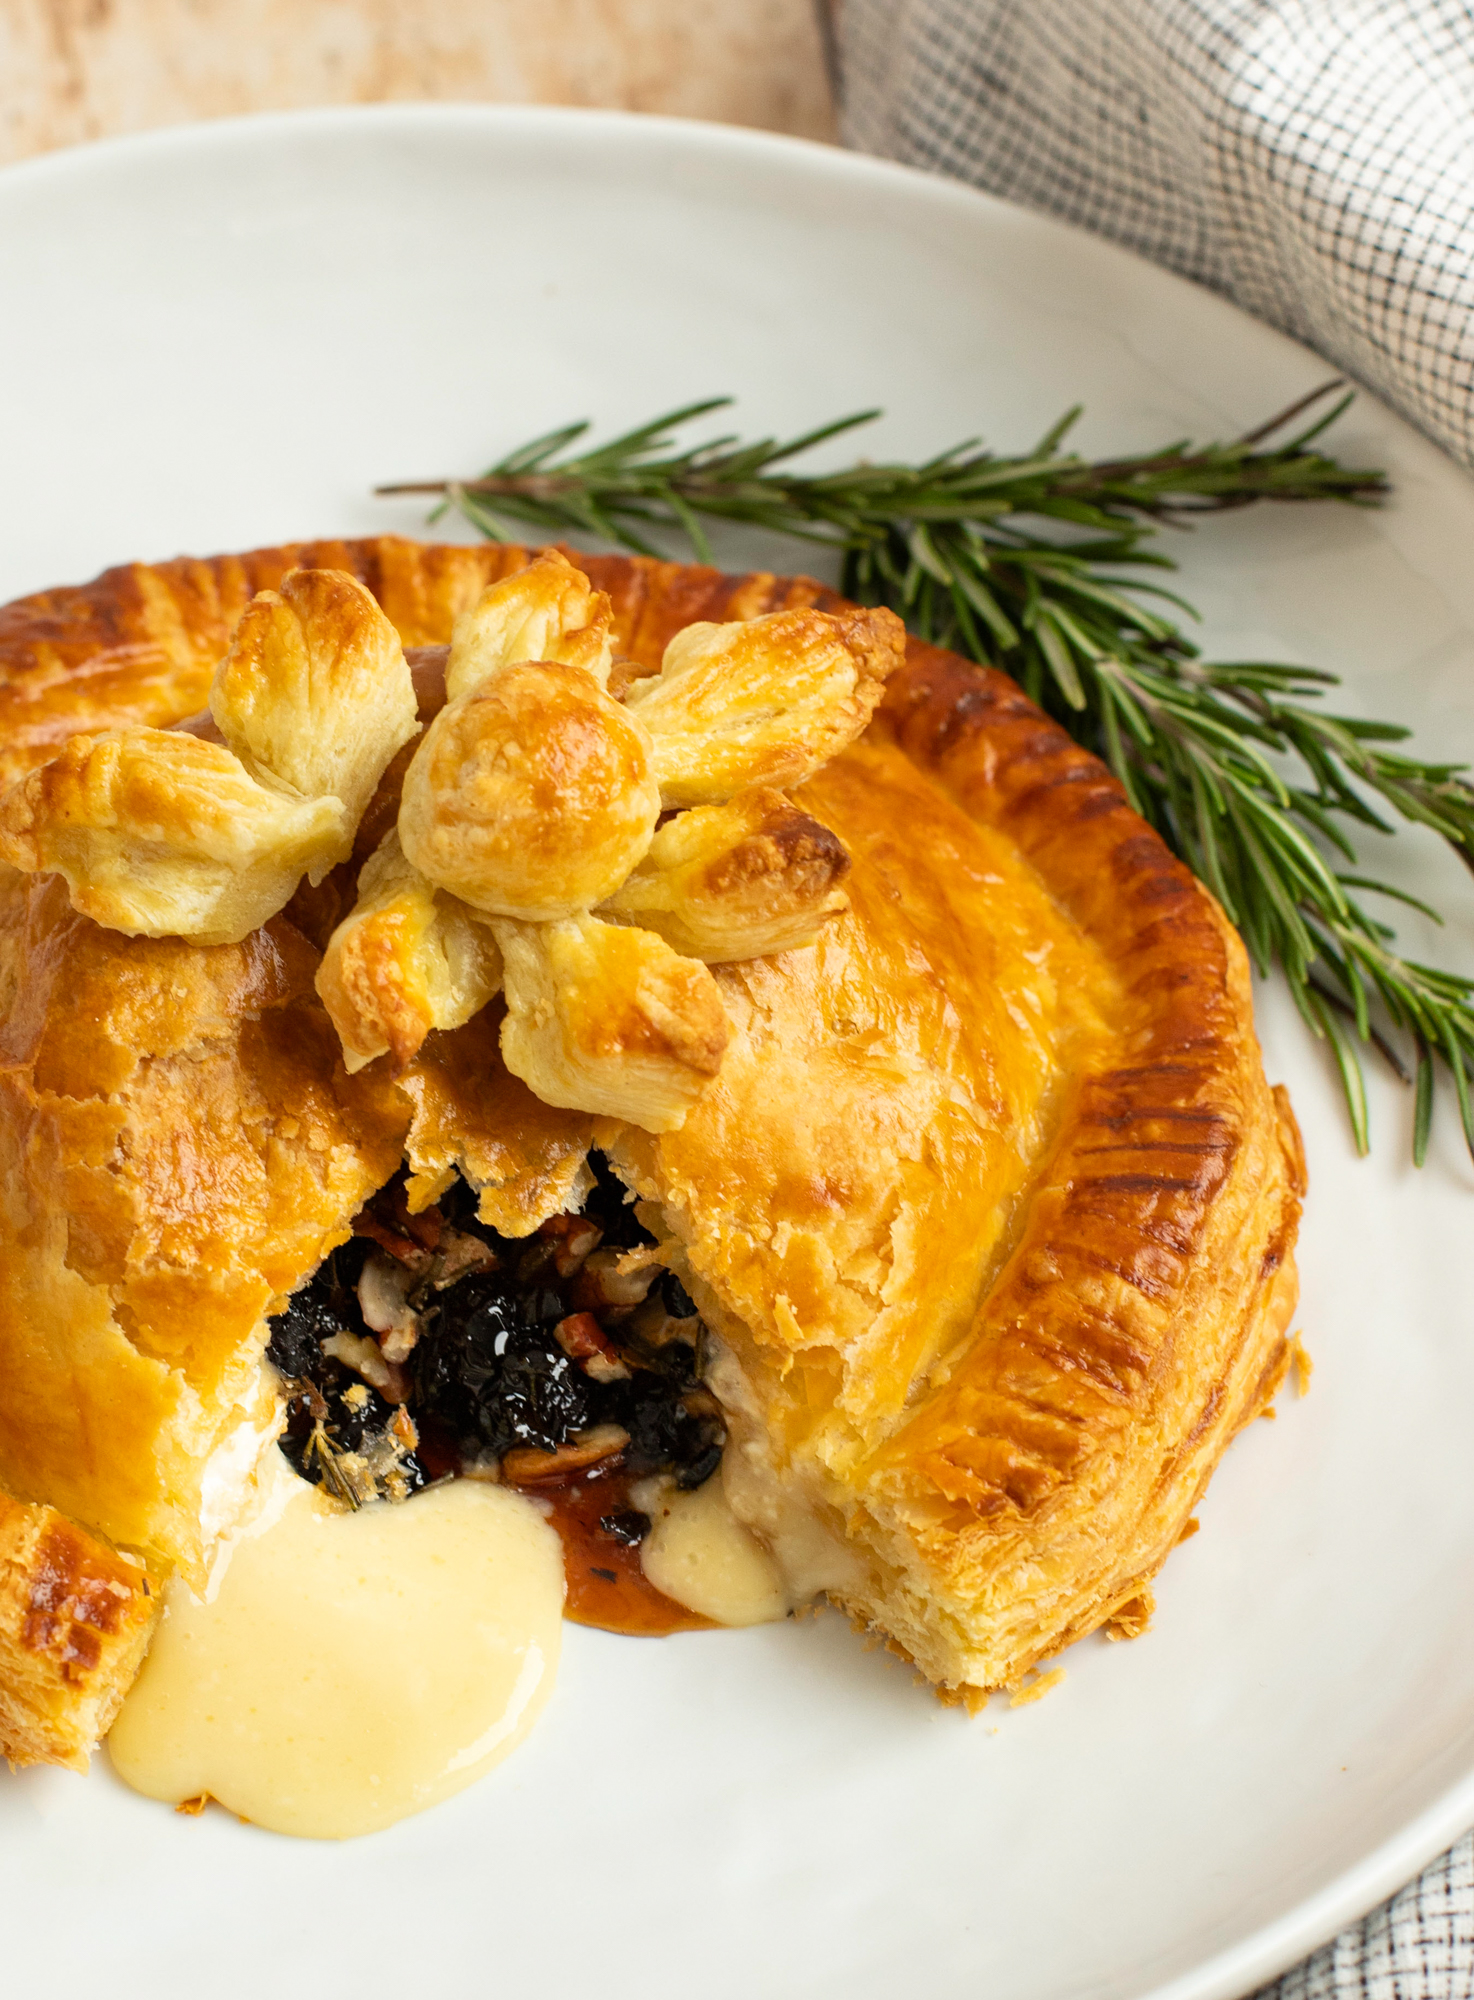 Easy Baked Brie in Puff Pastry Recipe